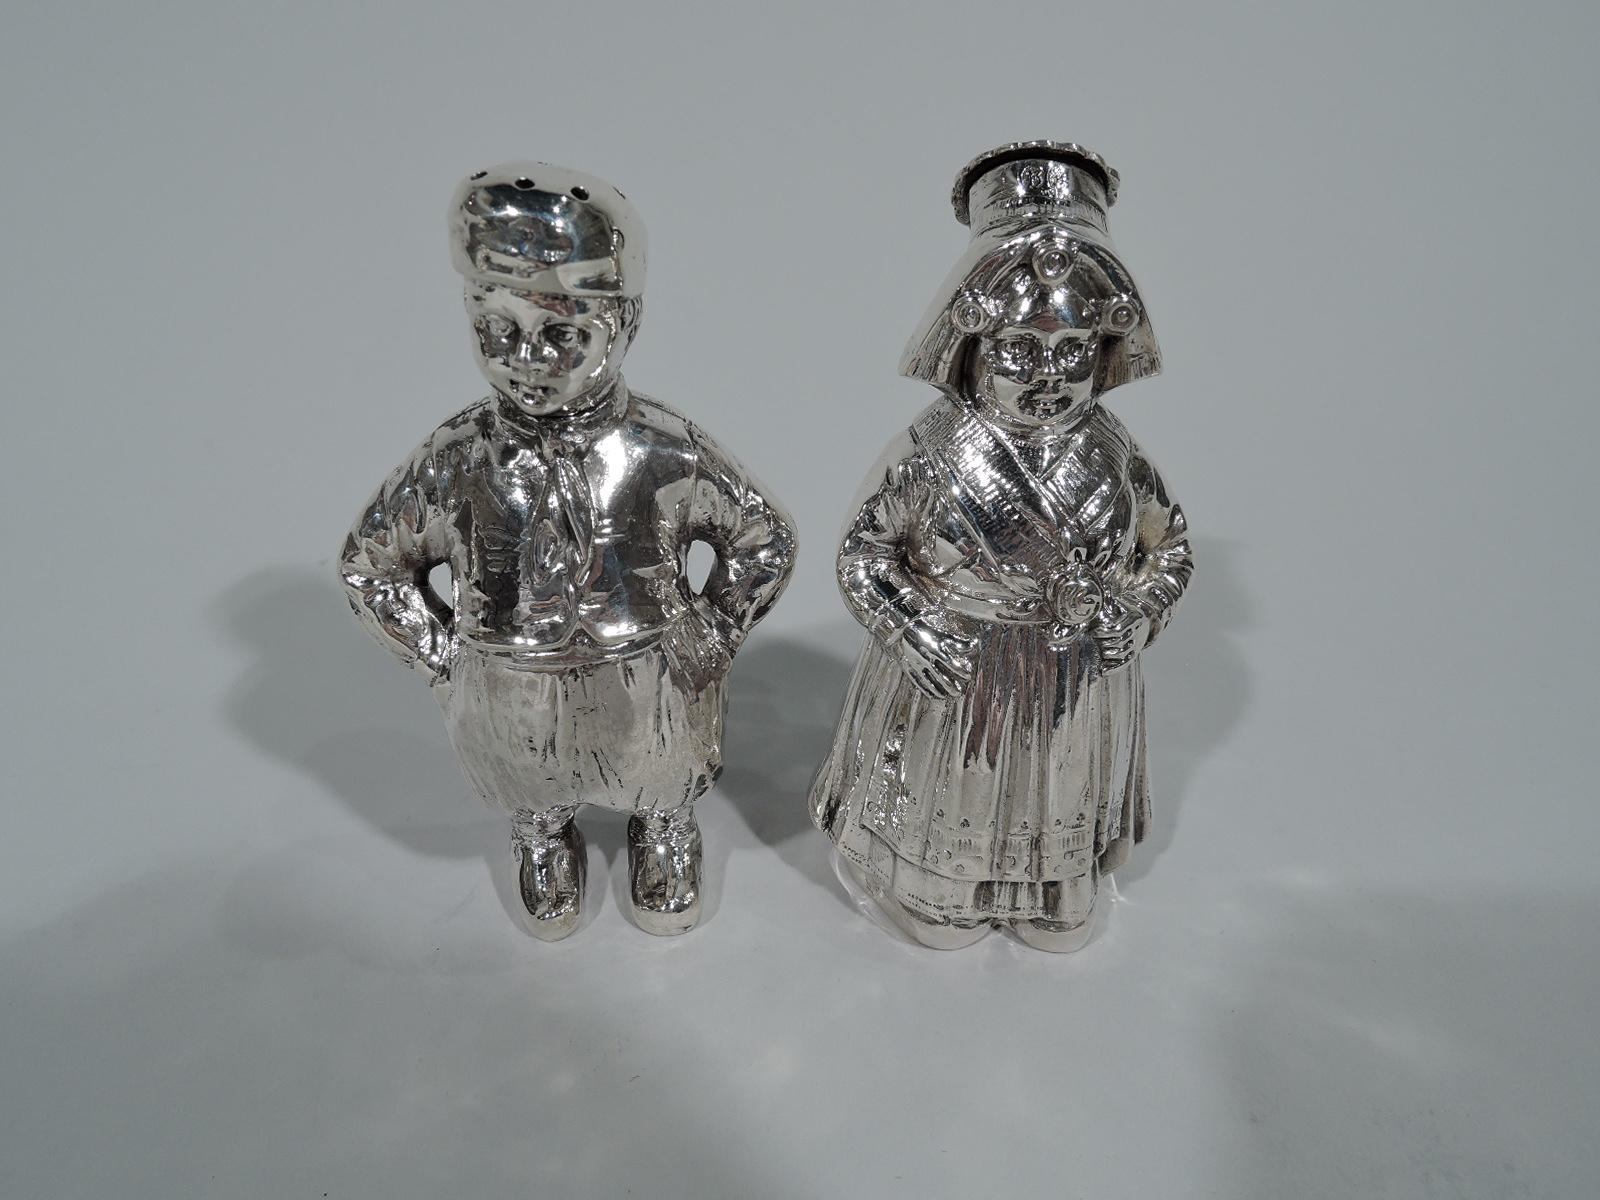 Two pairs of German 800 silver figural salt and pepper shakers. Each pair comprises one boy and one girl. The boys wear baggy trousers and strike a defiant pose with hands on hips. The girls, with shawls and aprons layered over their gowns, appear